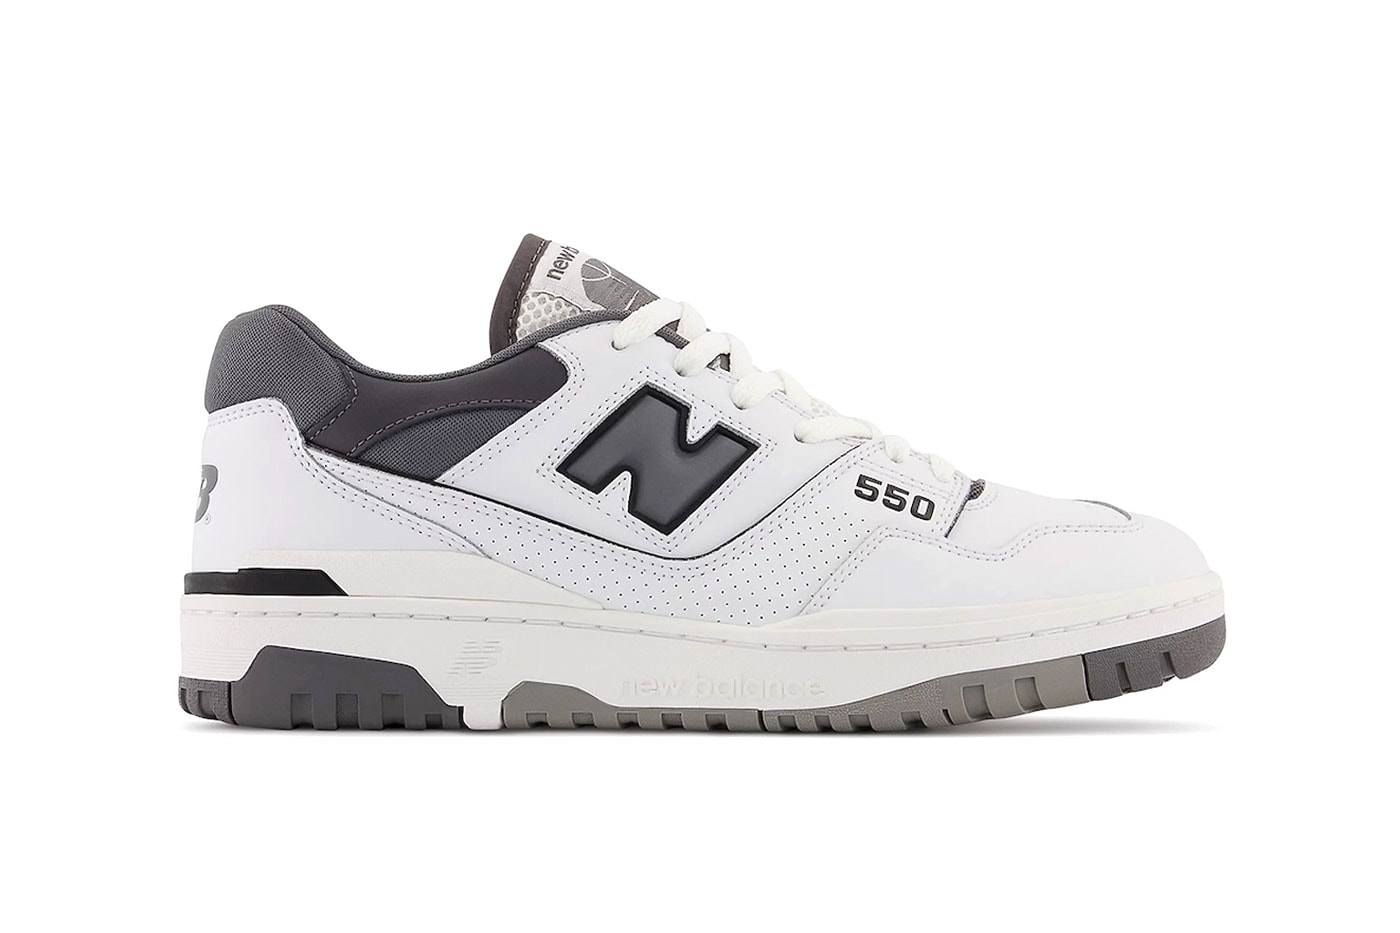 New Balance NB 550 white gray BB550WTG N leather perforated mesh 2022 120 usd release info date price